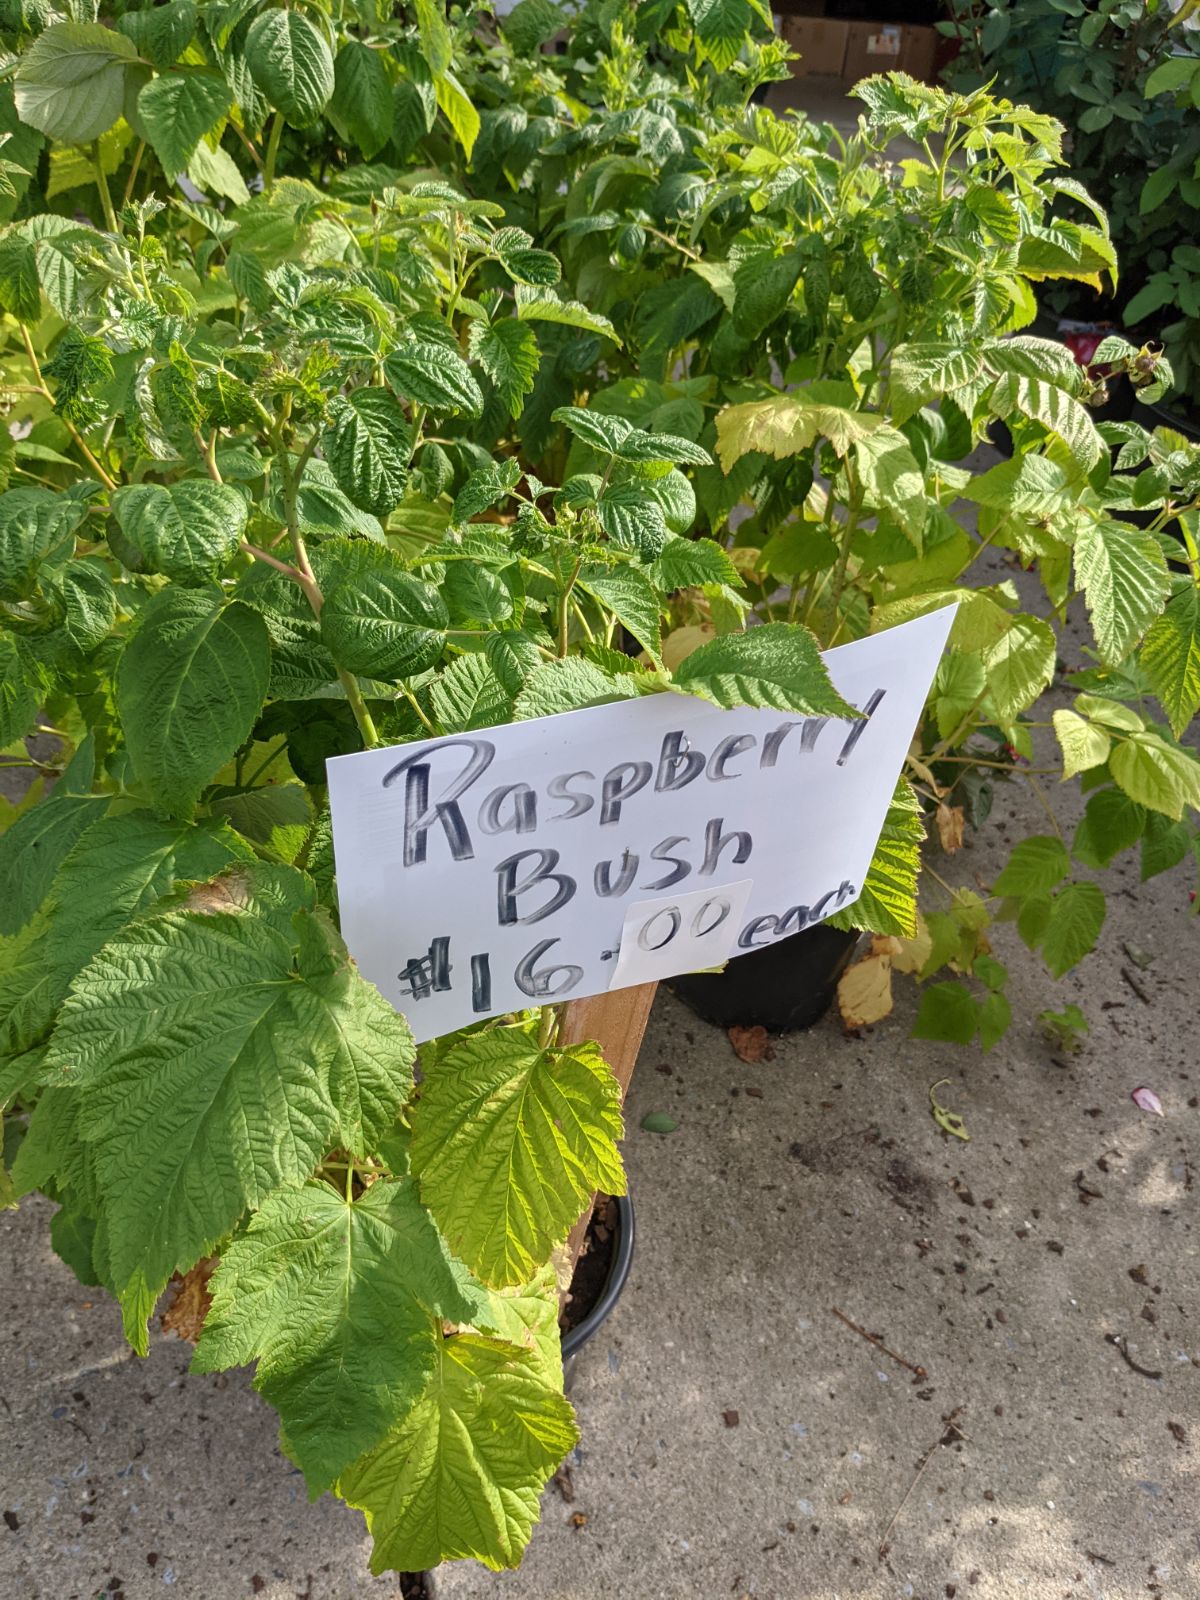 Raspberry bush for sale at Rosie's Farm Stand in New Jersey